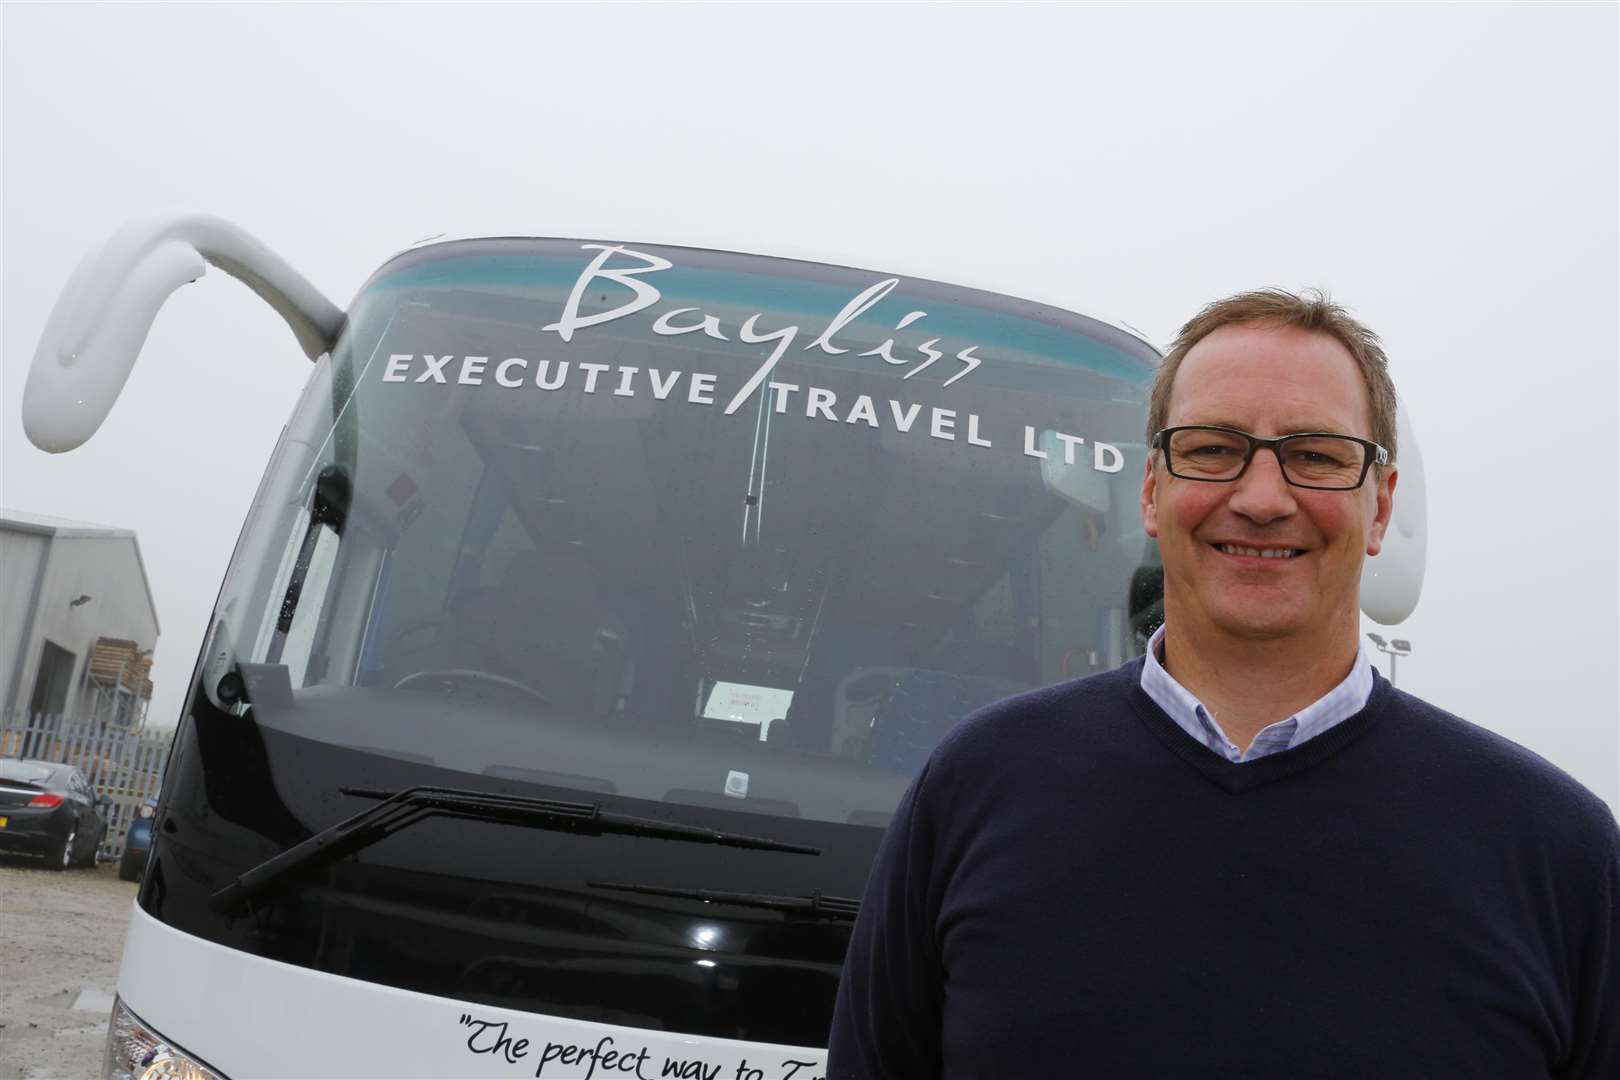 Alistair Bayliss from Bayliss Executive Travel will be at the 2019 brochure launch